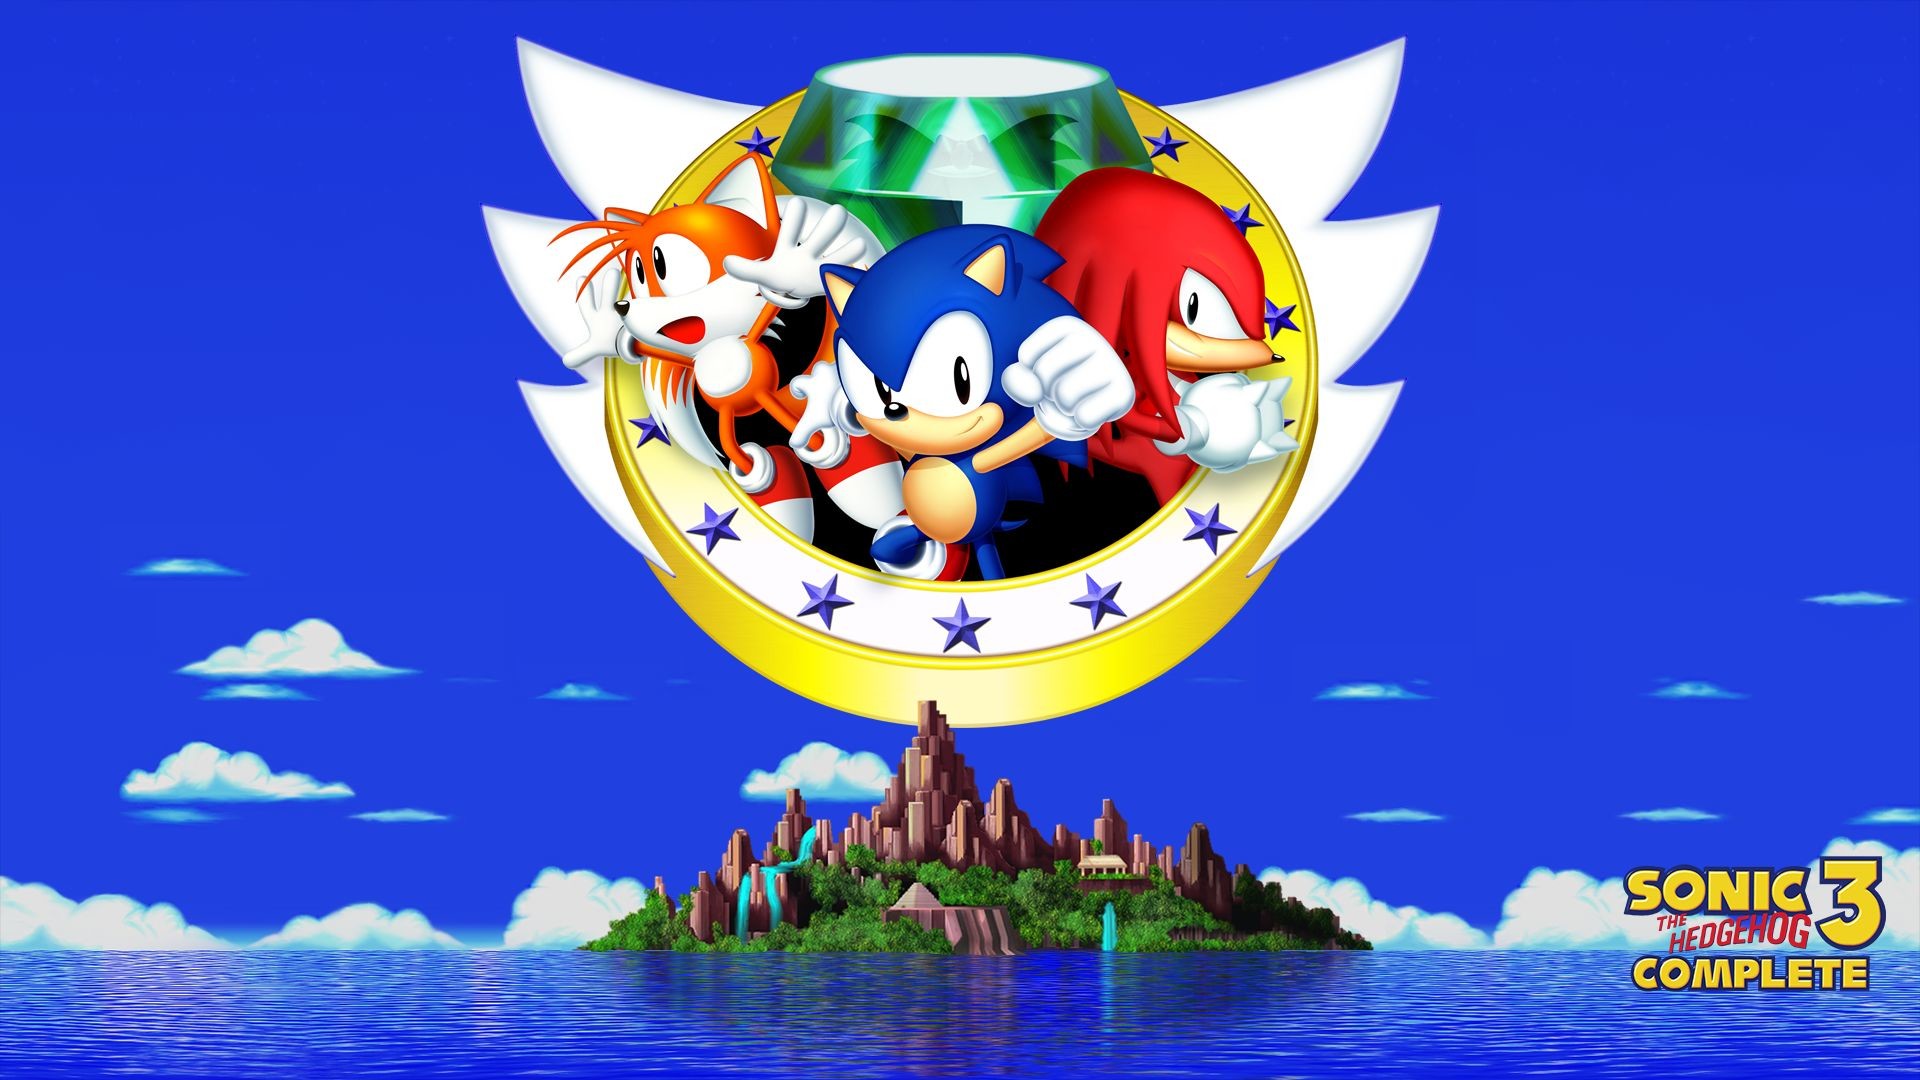 1920x1080 Sonic the Hedgehog 3 HD Wallpaper | Background Image |  |  ID:607295 - Wallpaper Abyss